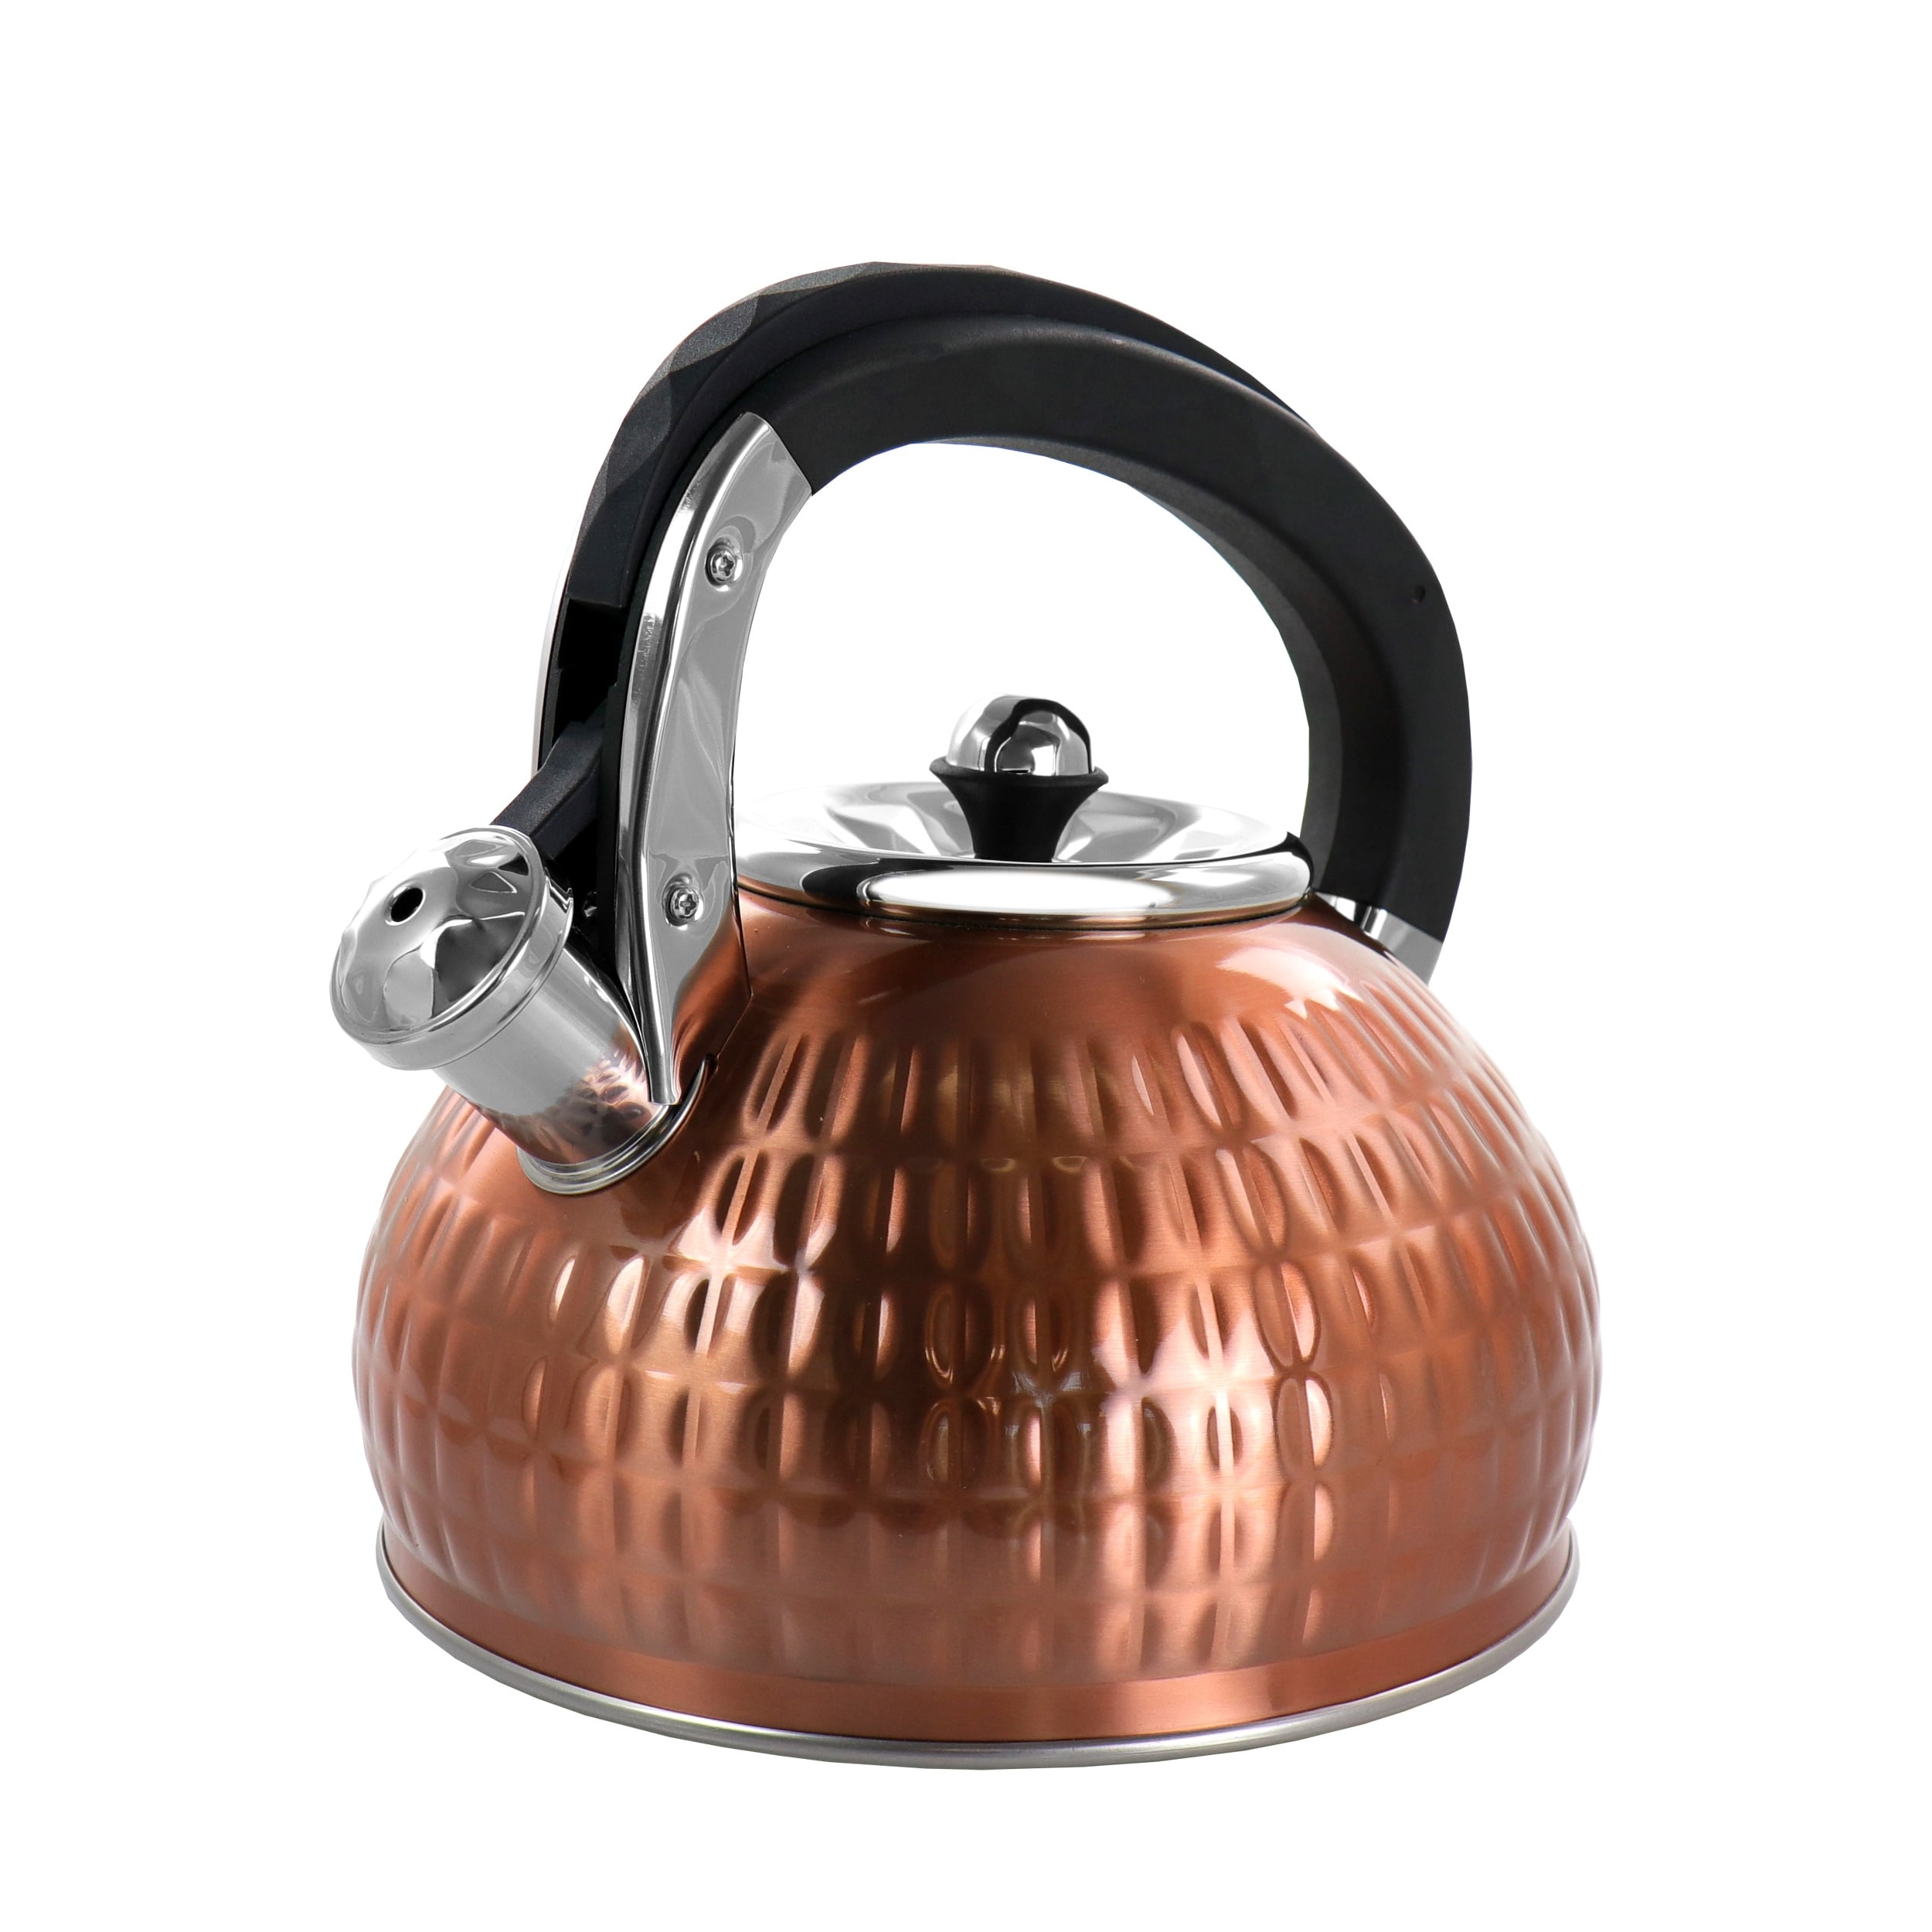 https://ak1.ostkcdn.com/images/products/is/images/direct/df7497b5ca1288954c8478a0716eff3ae6c0953c/MegaChef-3-Liter-Stovetop-Whistling-Kettle-in-Copper.jpg